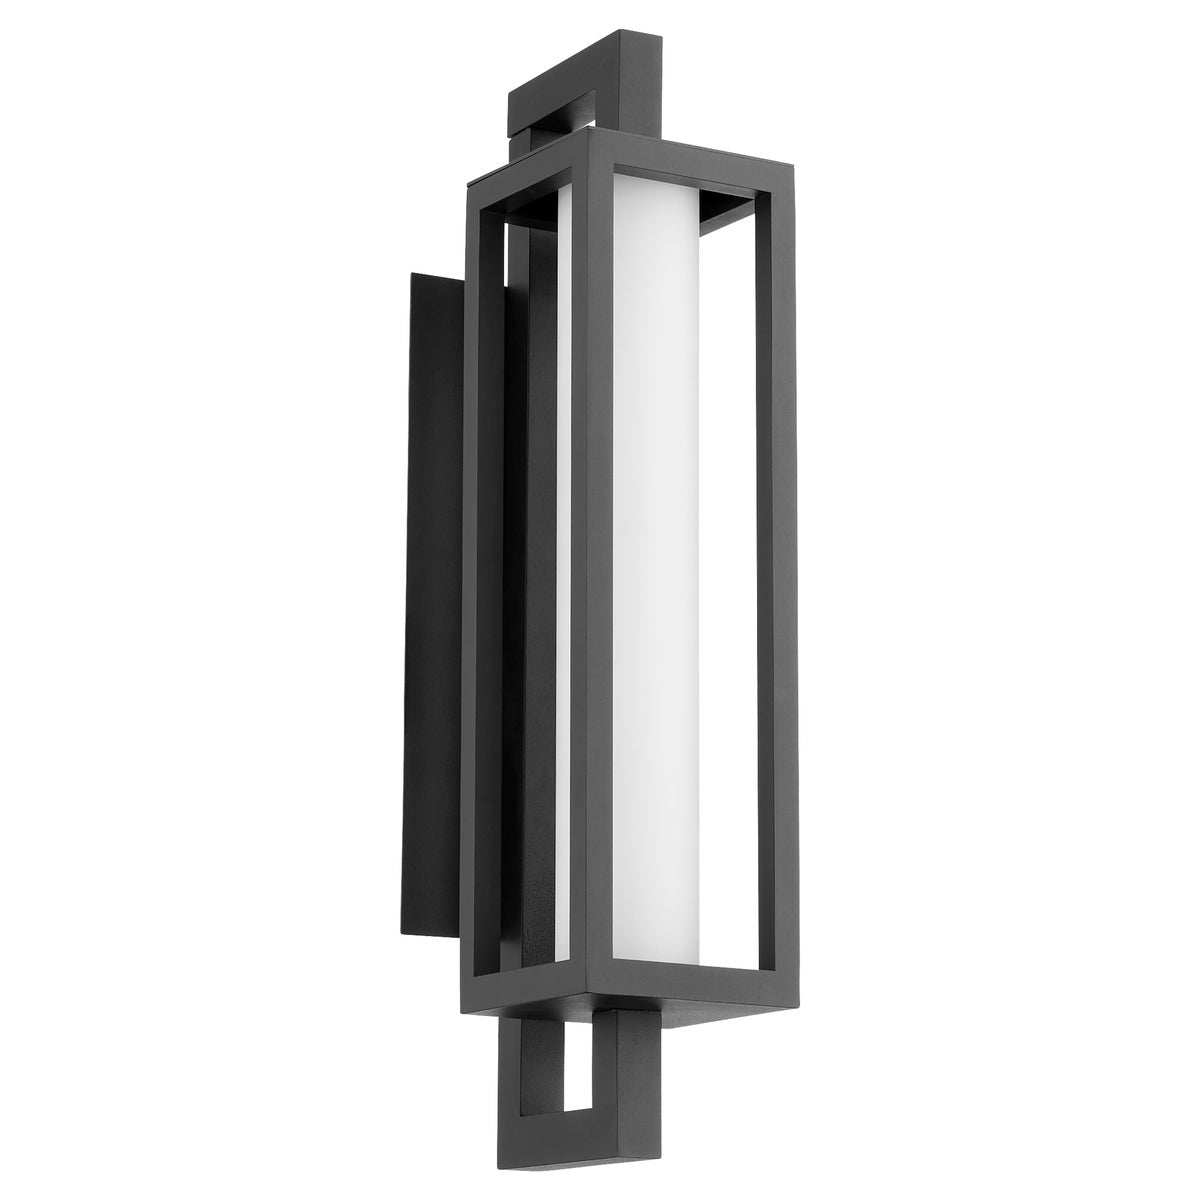 LED Outdoor Wall Sconce with black frames and satin opal glass. Perfect for soft contemporary outdoor spaces. Illuminate patios, entrances, porches, or entryways. 796 lumens, 18W, 3000K, dimmable. UL Listed, Wet Location. 2-year warranty.